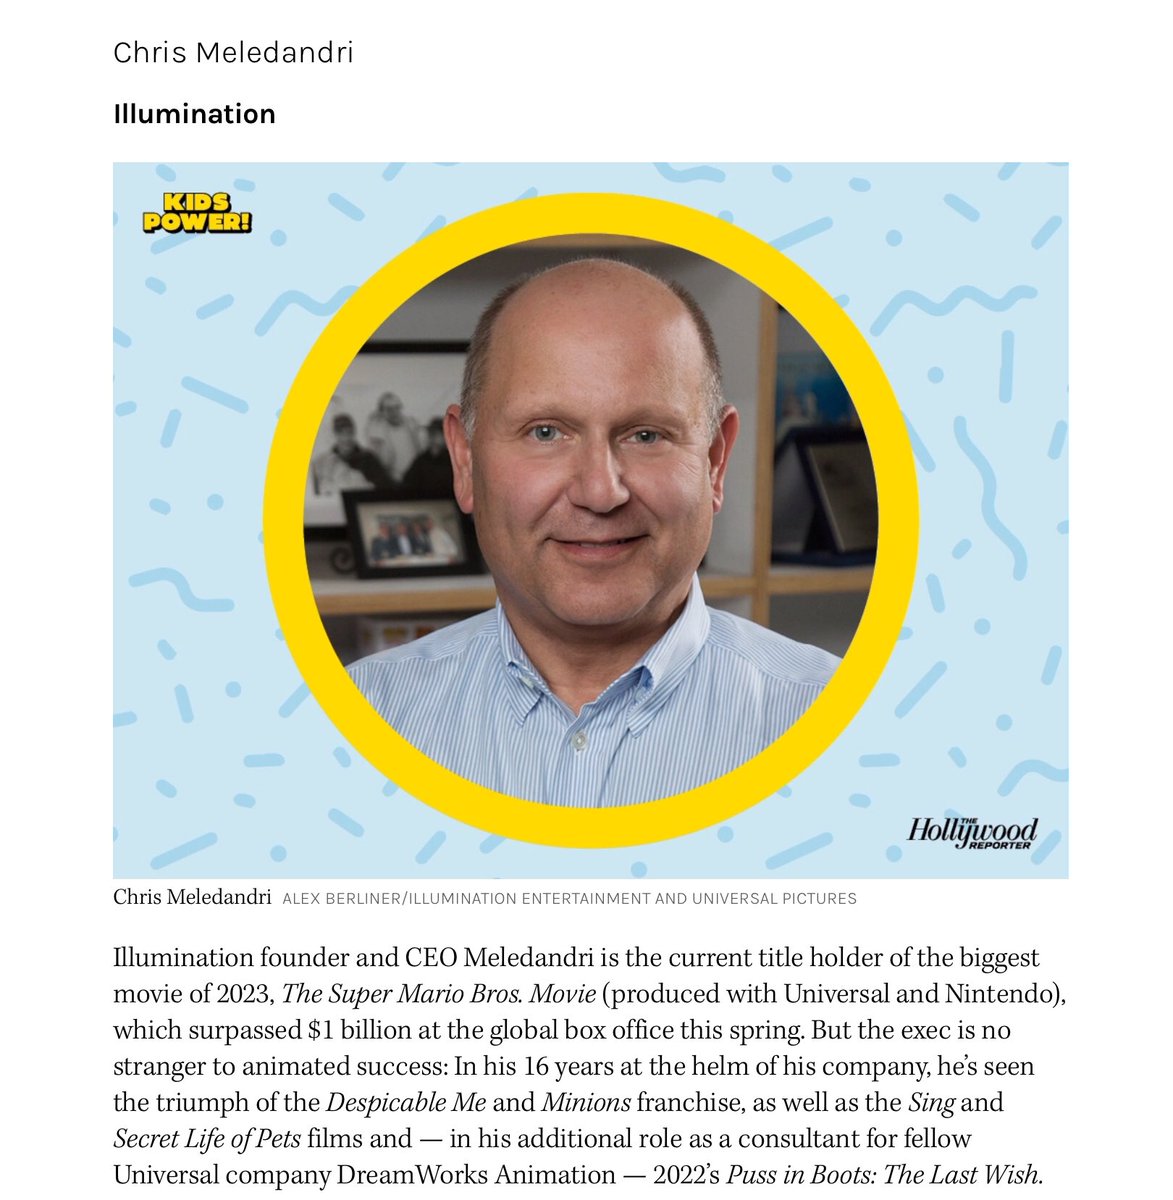 Chris Meledandri is listed as one of the 75 most powerful people in kids’ entertainment by @THR.
#despicableme #mariomovie #Illumination